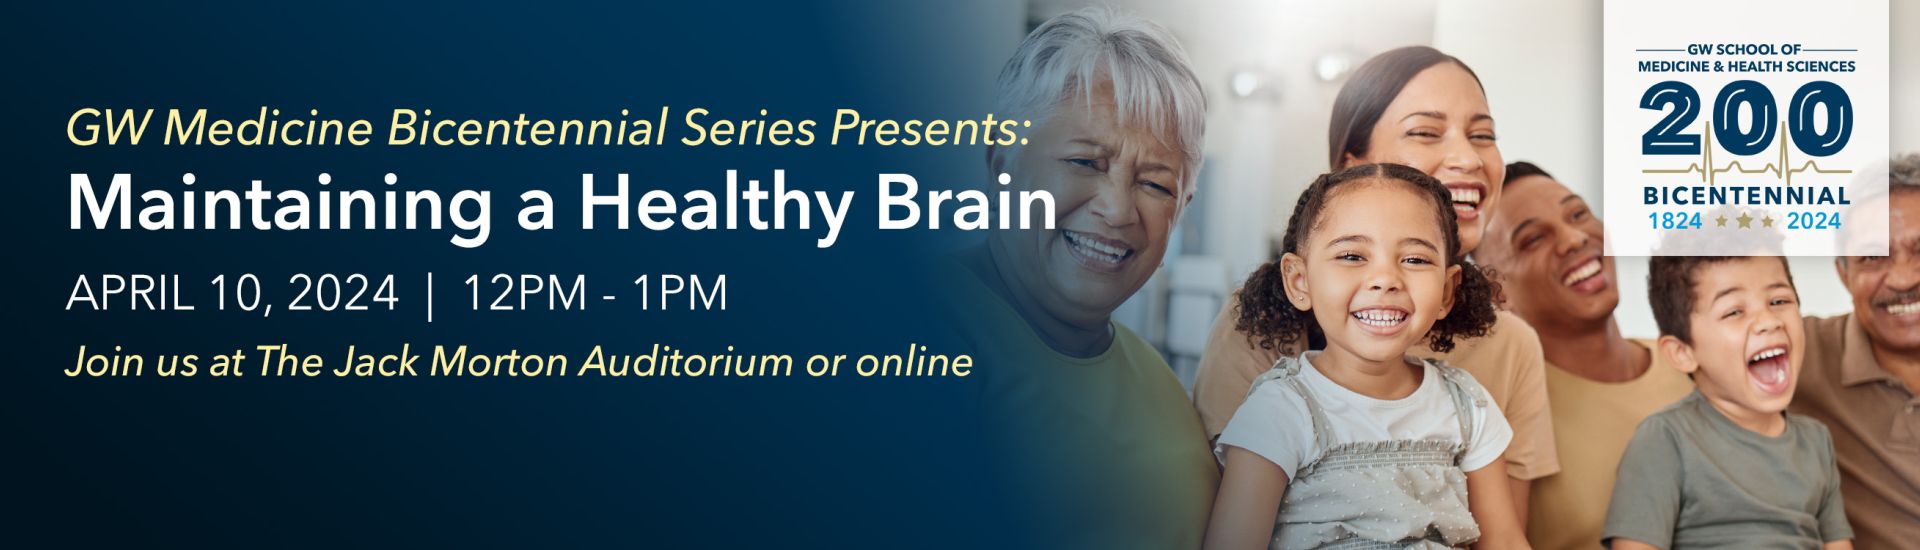 Maintaining a Healthy Brain event banner